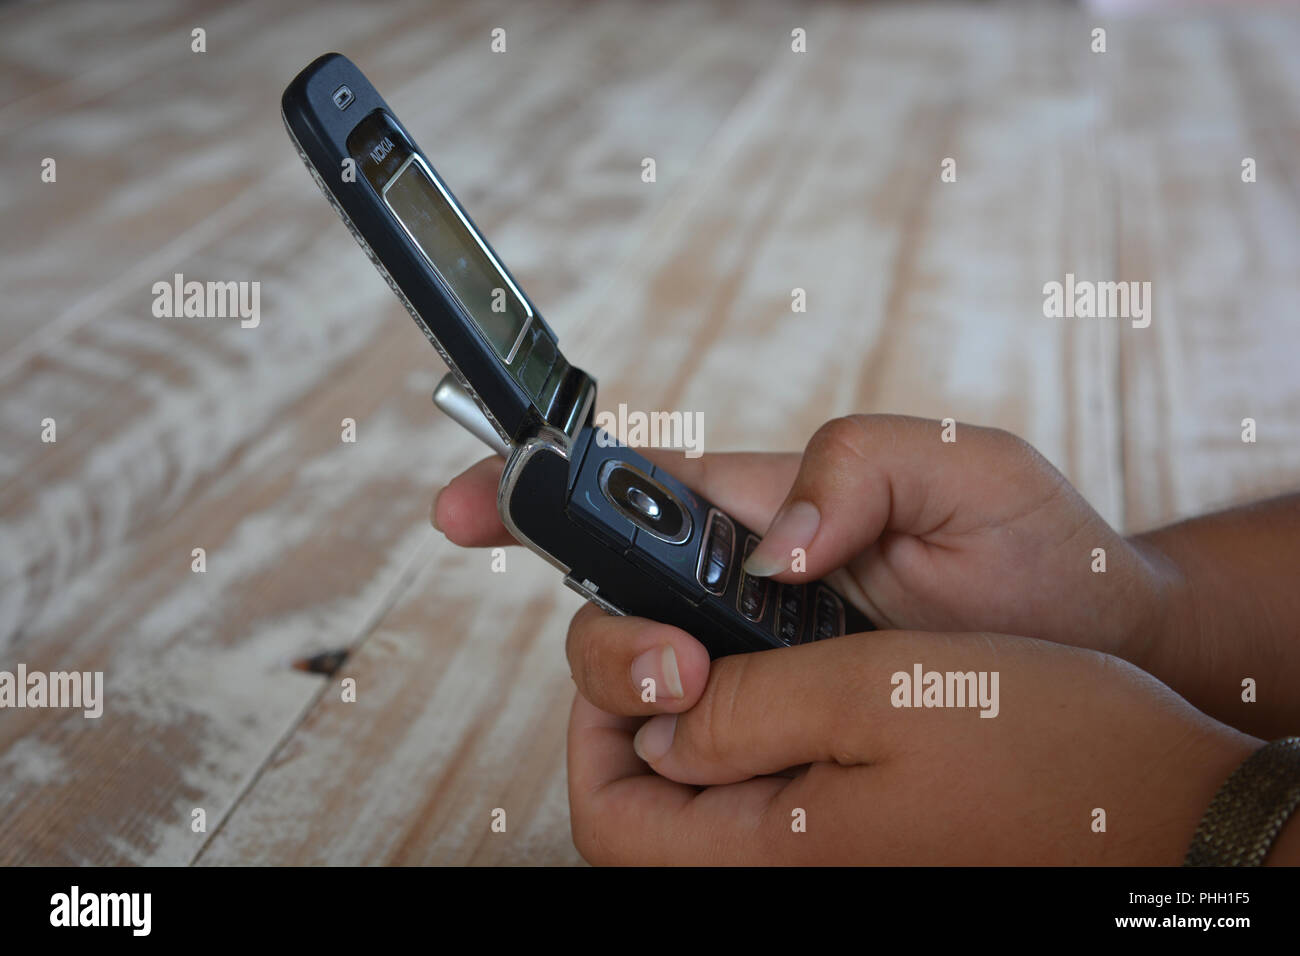 An old fashioned Nokia flip phone in a woman's hands, against a wooden tabletop background with copy space Stock Photo